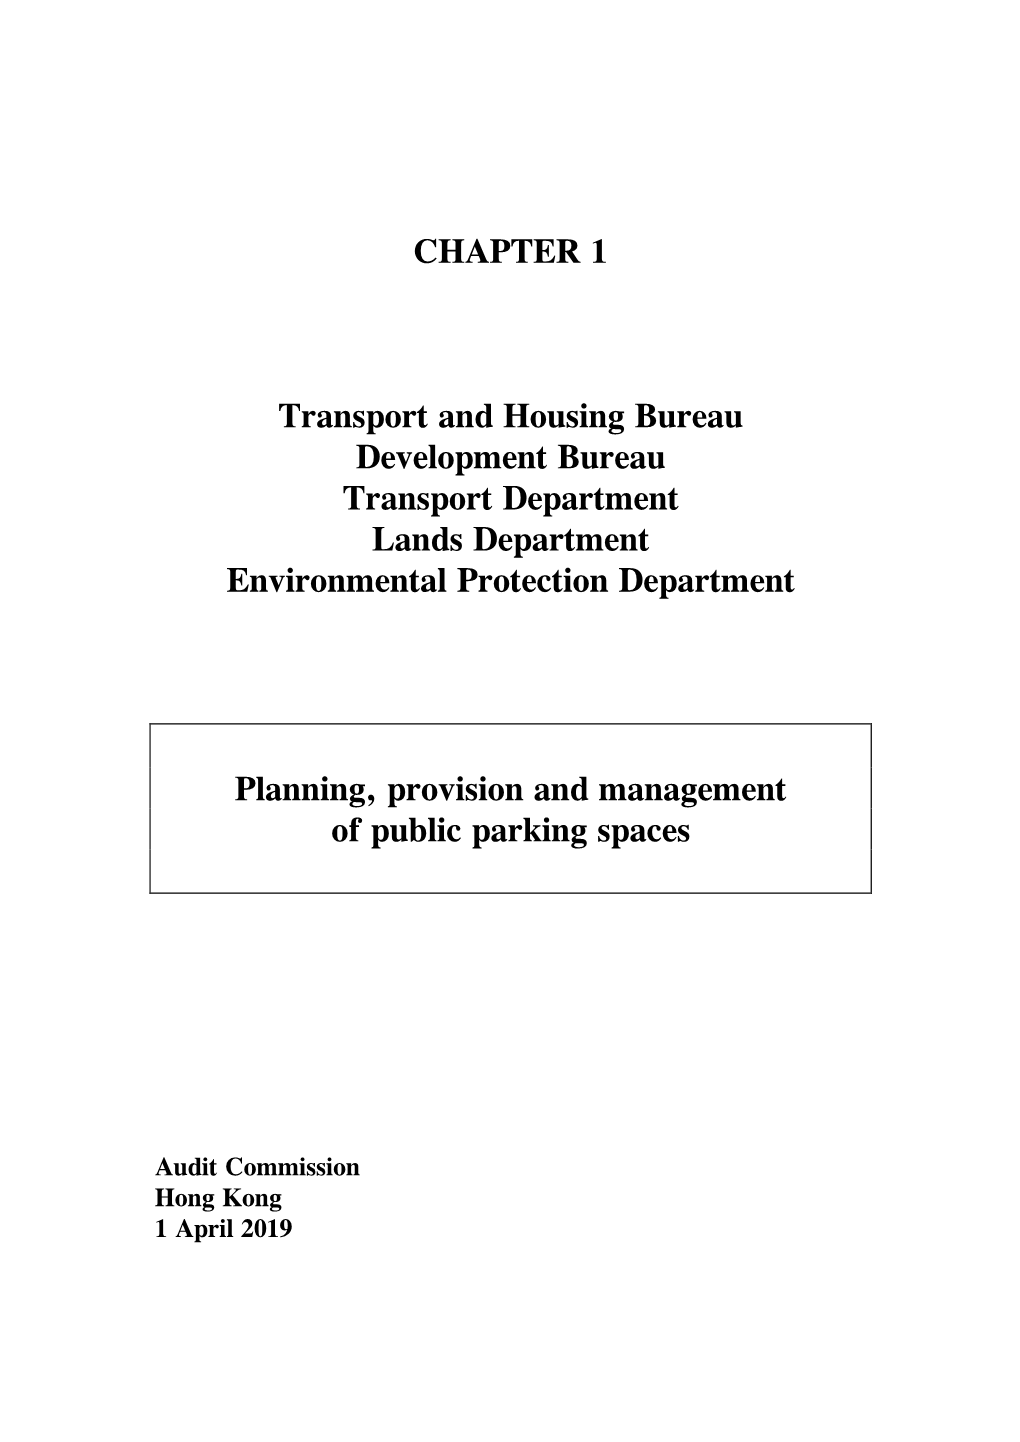 Management of On-Street Metered Parking Spaces 4.4 – 4.18